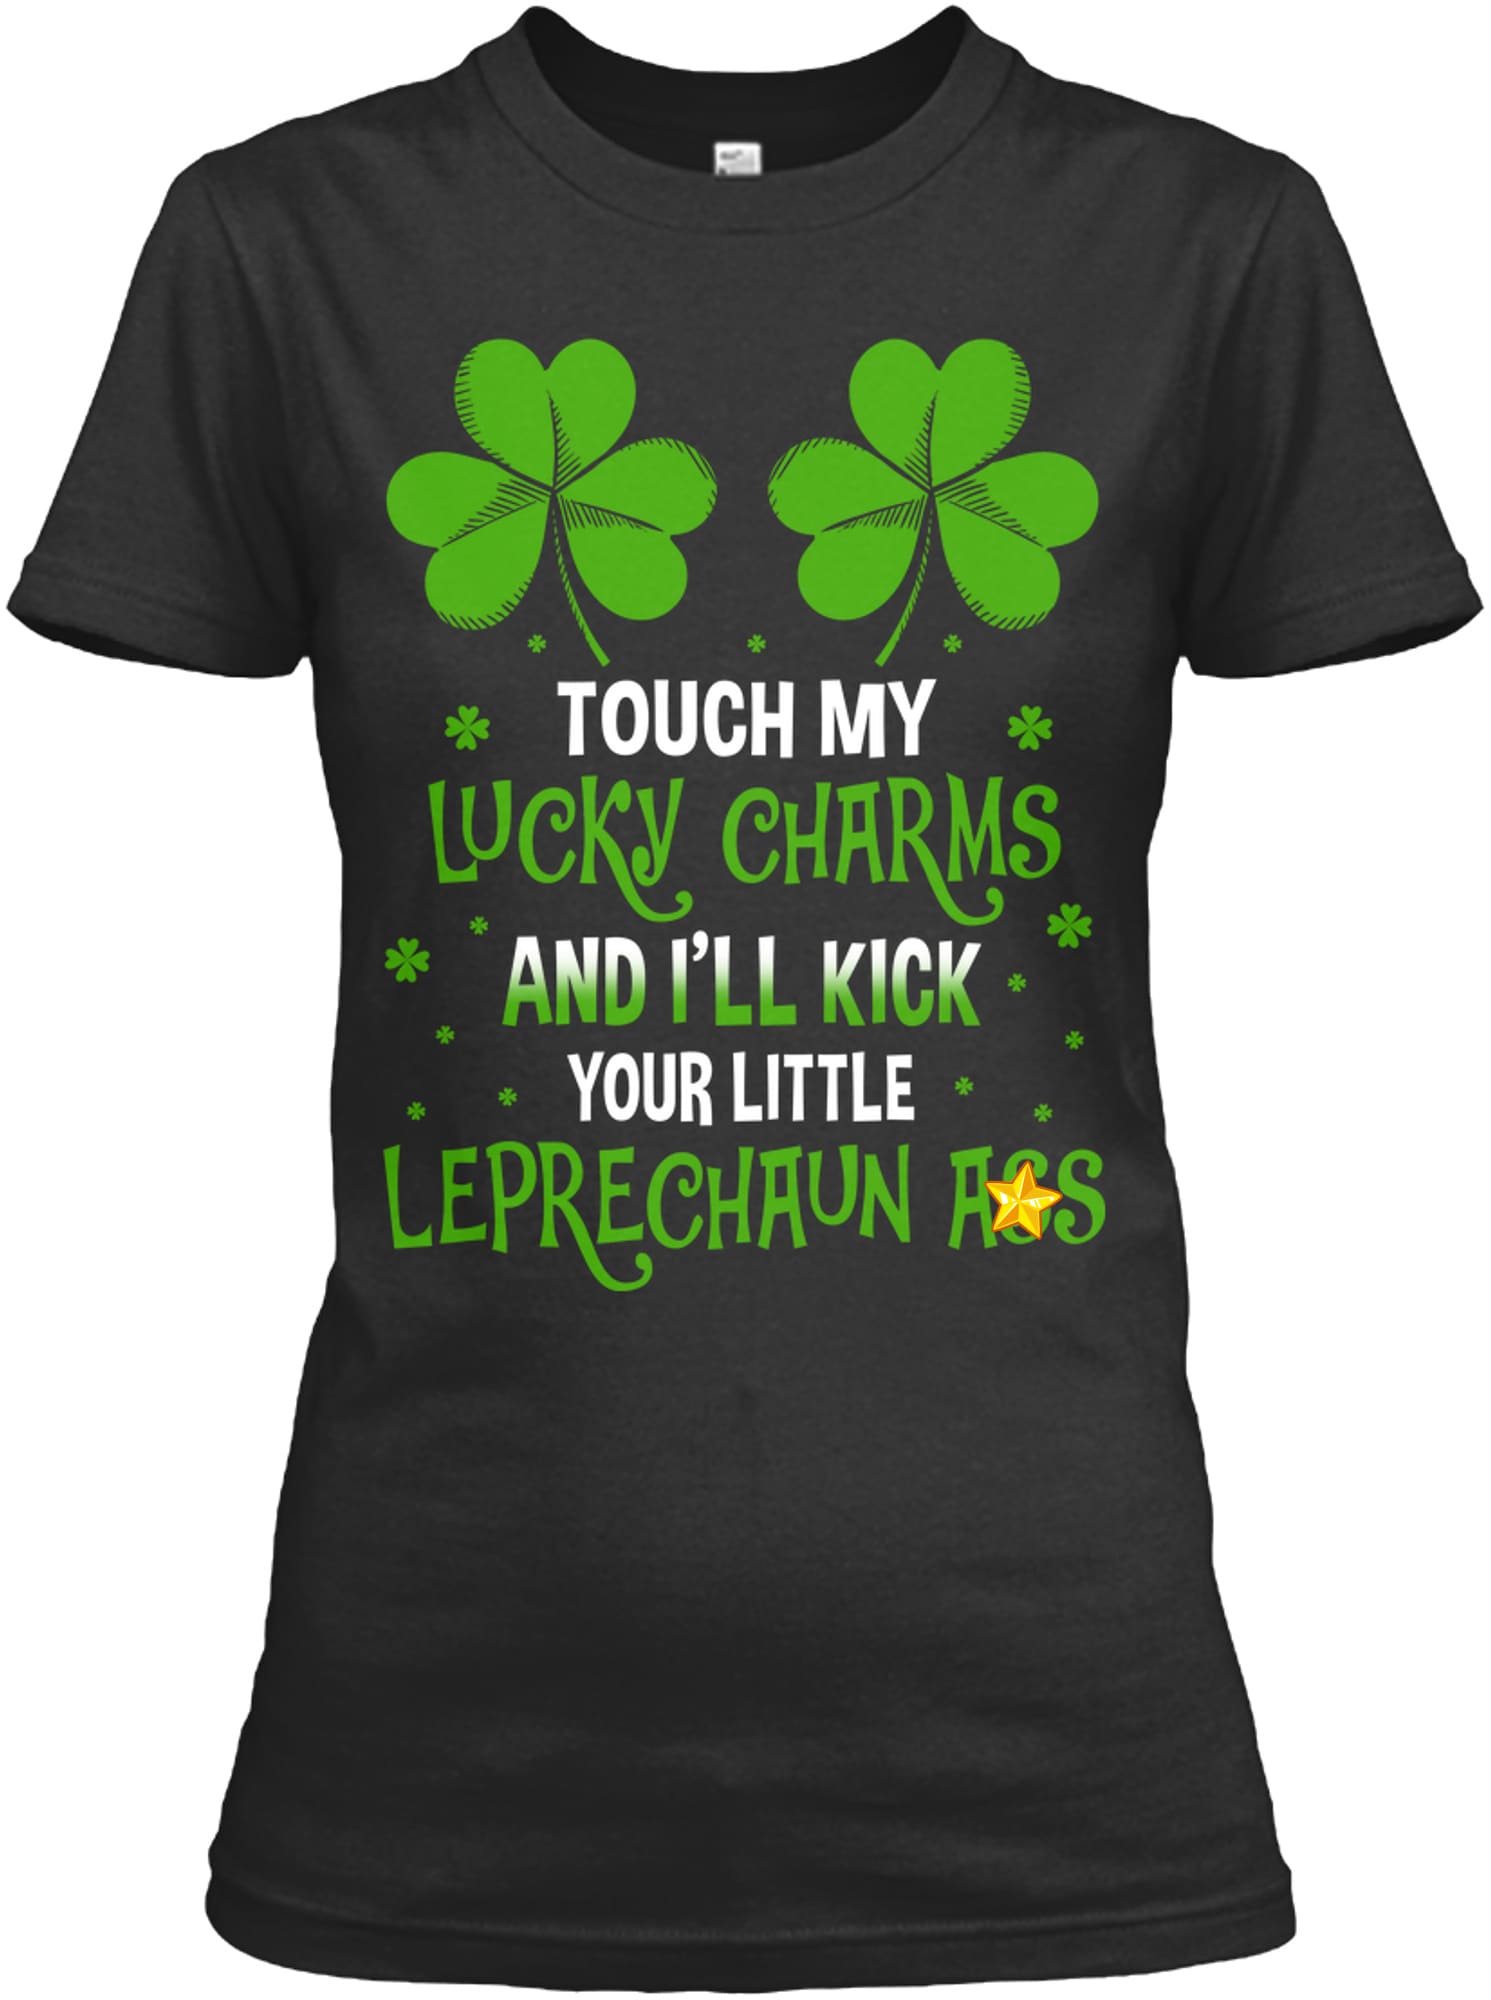 Touch my lucky charms and i'll kick your little leprechaun ass